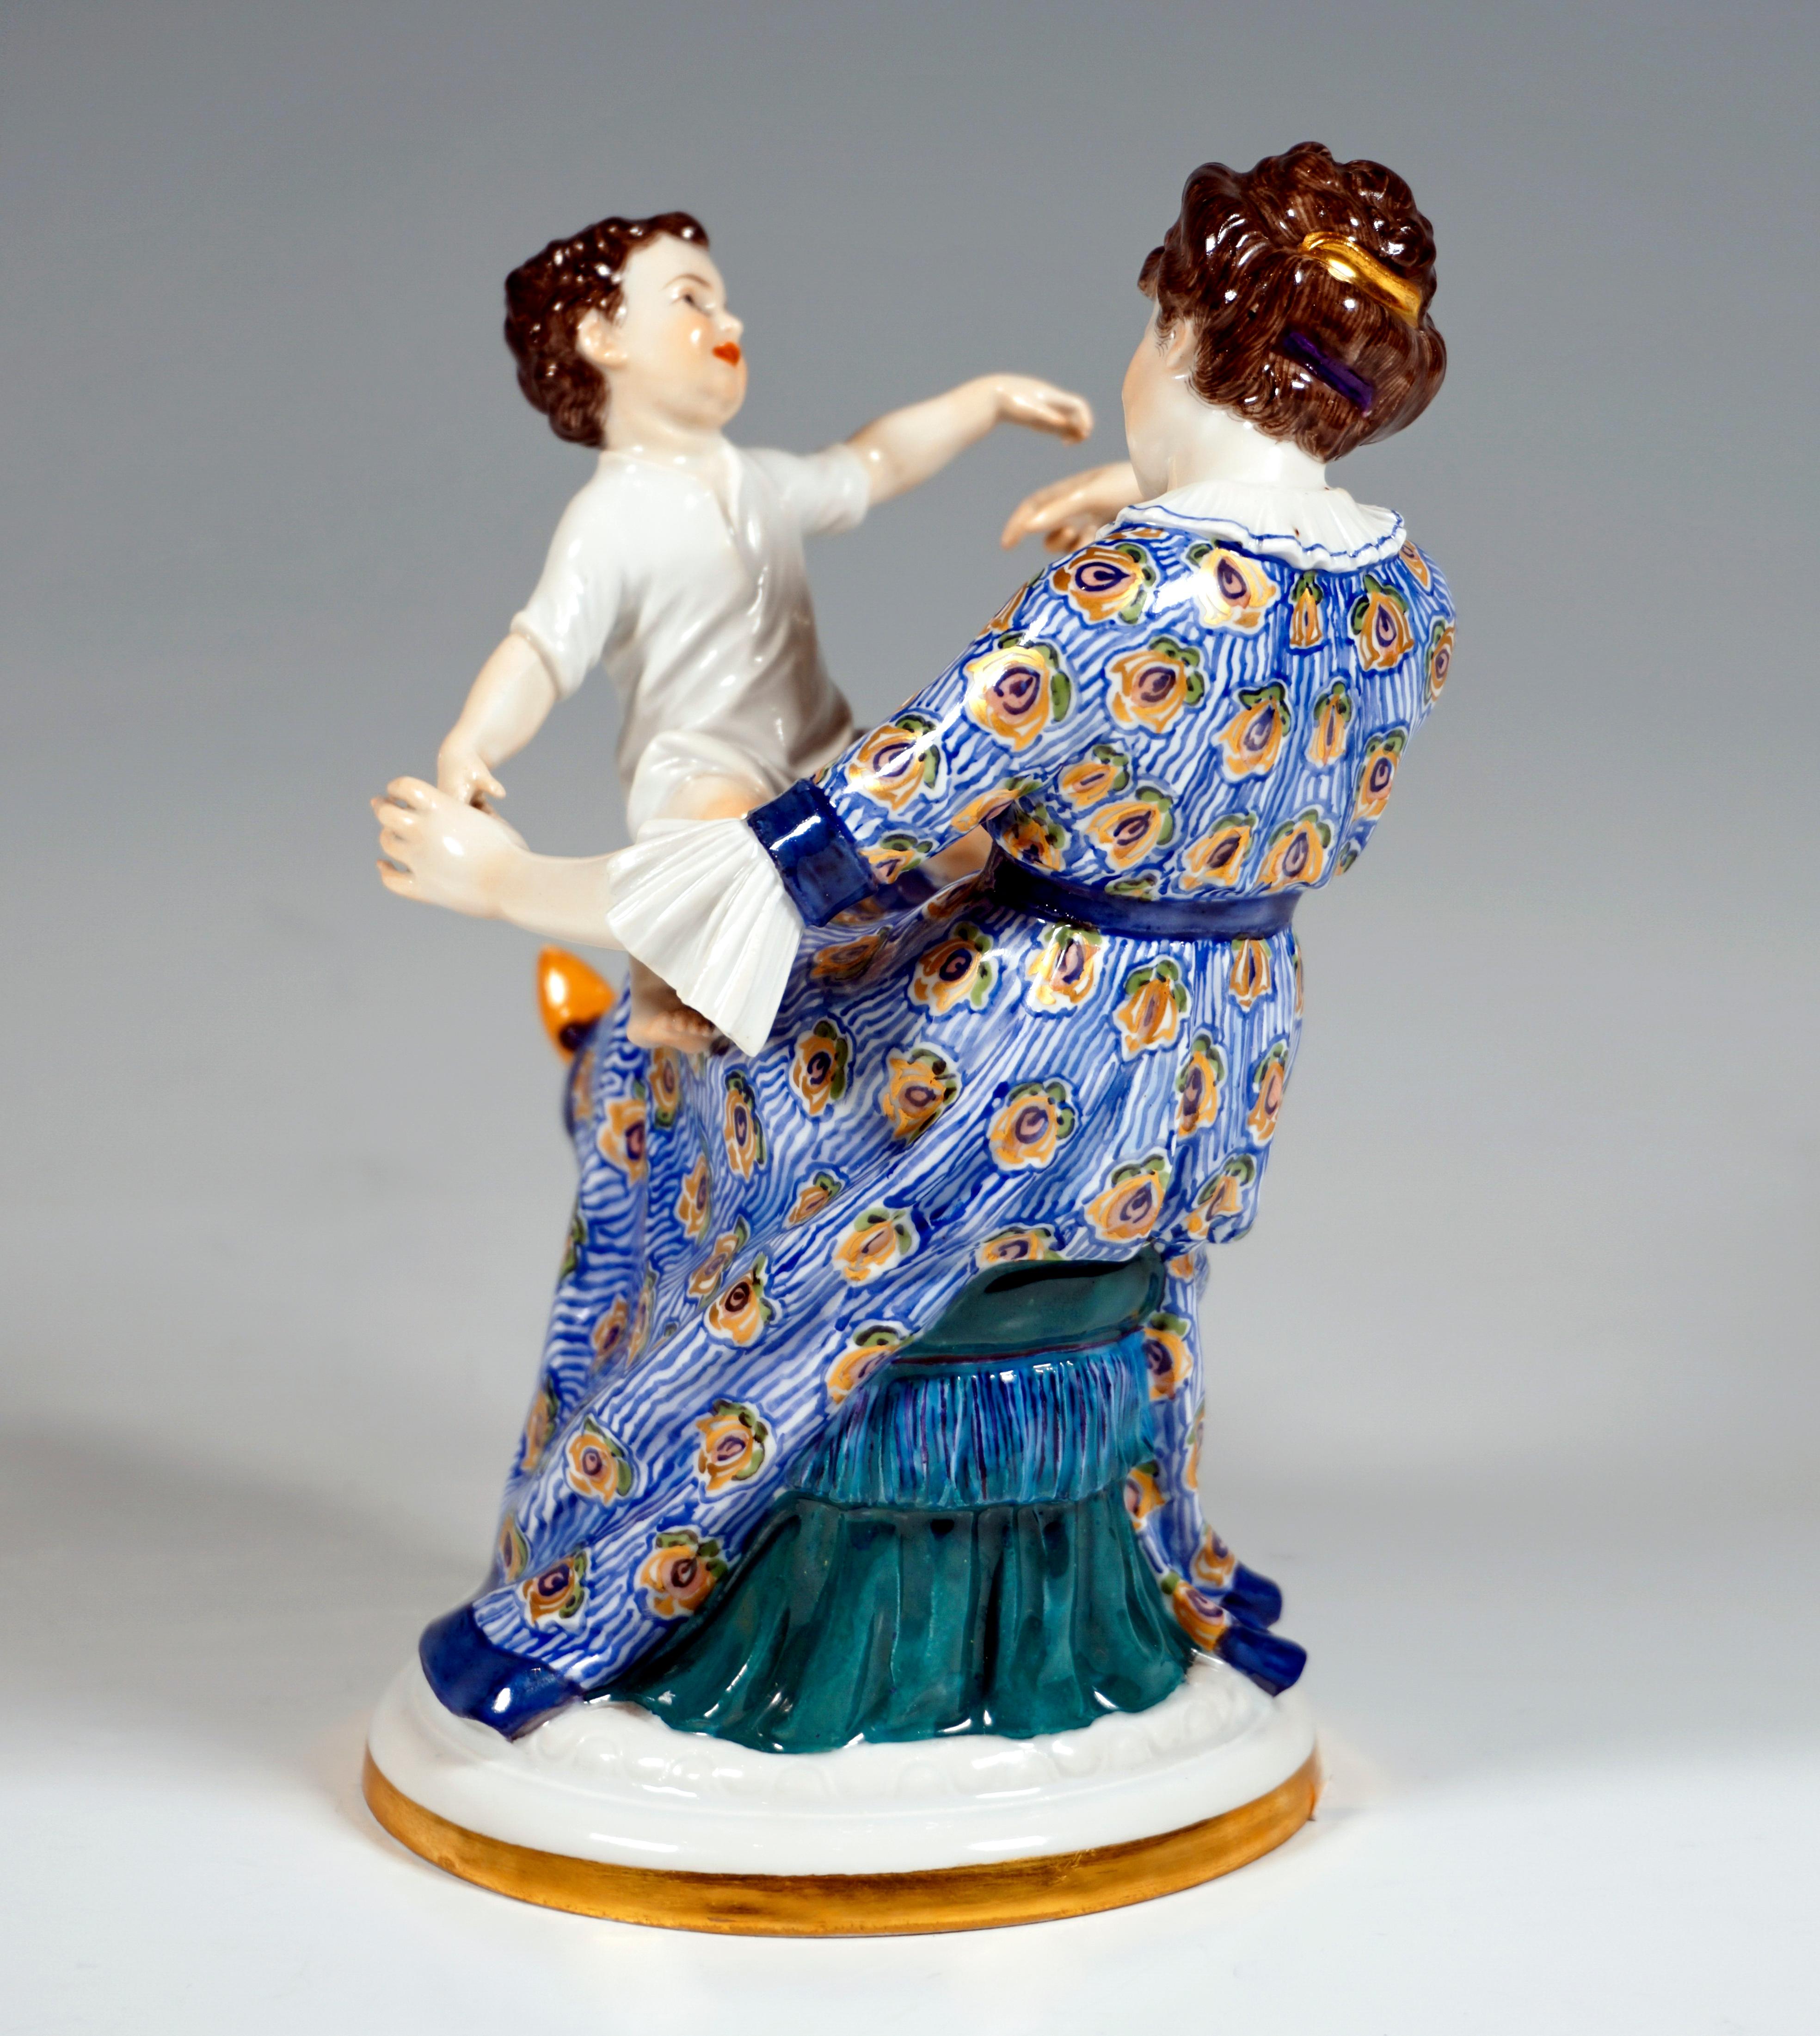 Hand-Crafted Art Nouveau Group 'Mother With Child', by Paul Helmig, Meissen Germany, ca 1912 For Sale